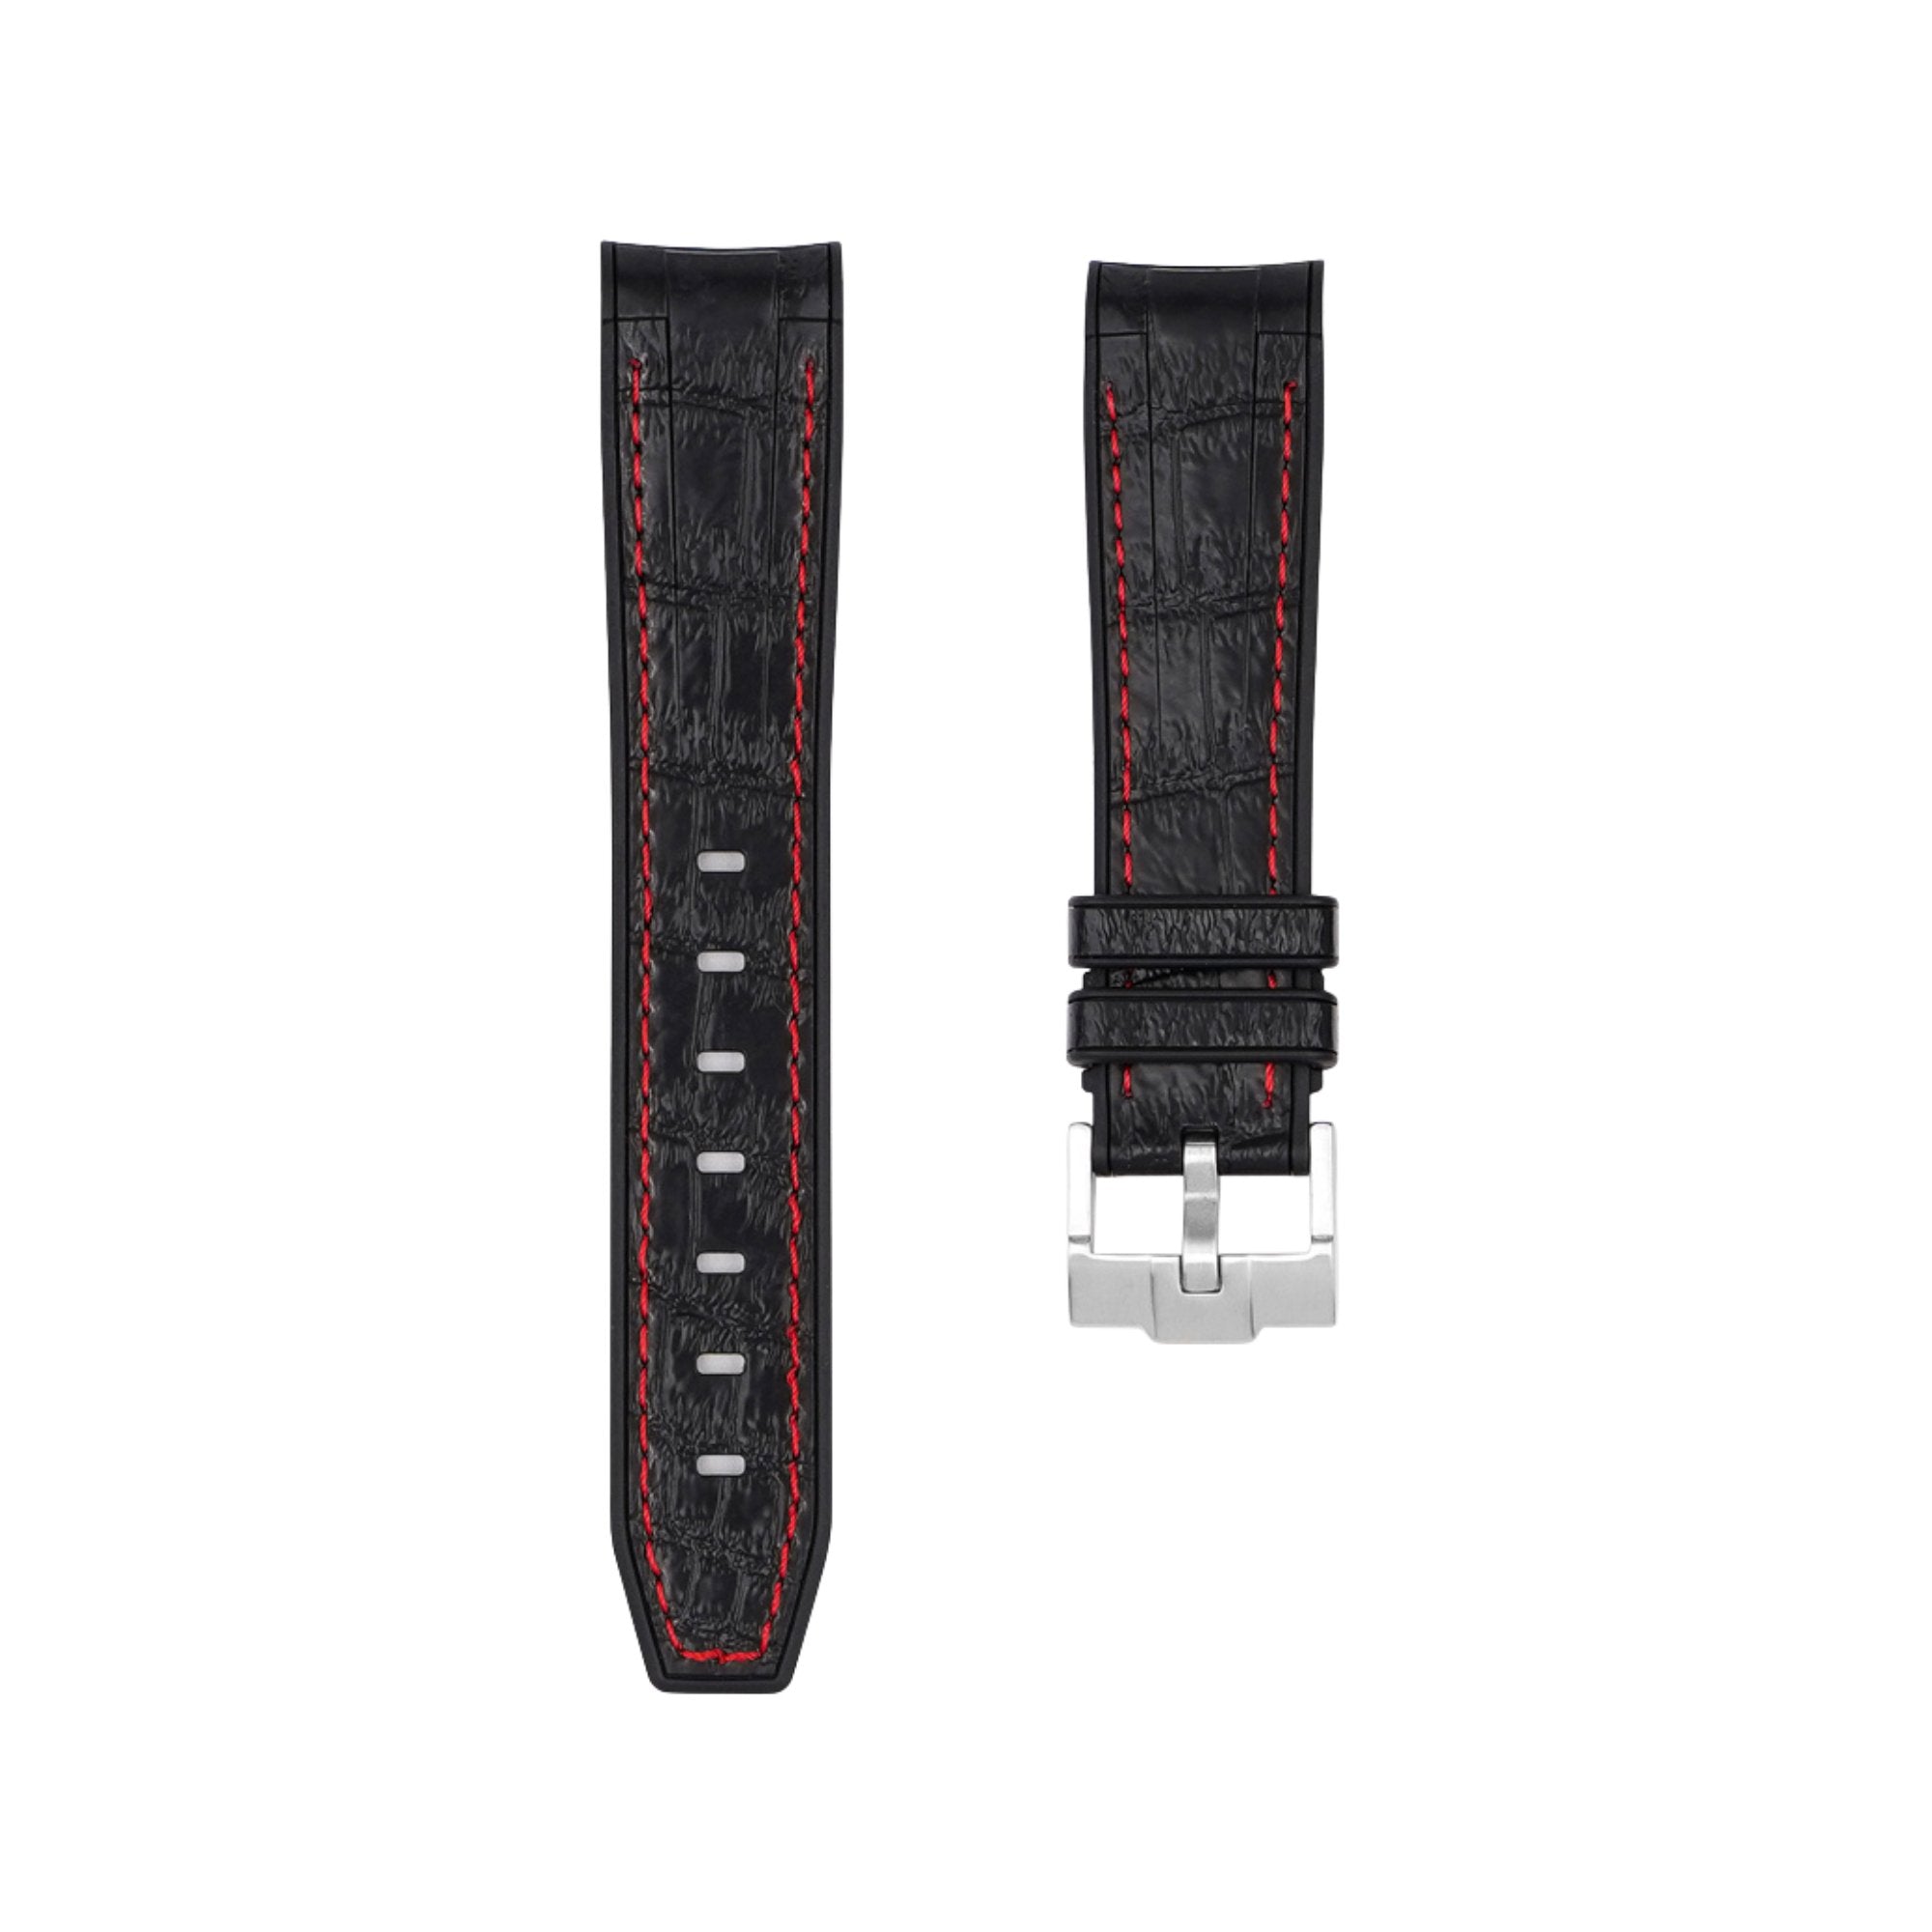 Alligator Embossed Curved End Premium Silicone Strap - Compatible with Omega Moonwatch - Black with Red Stitch (2406) -StrapSeeker